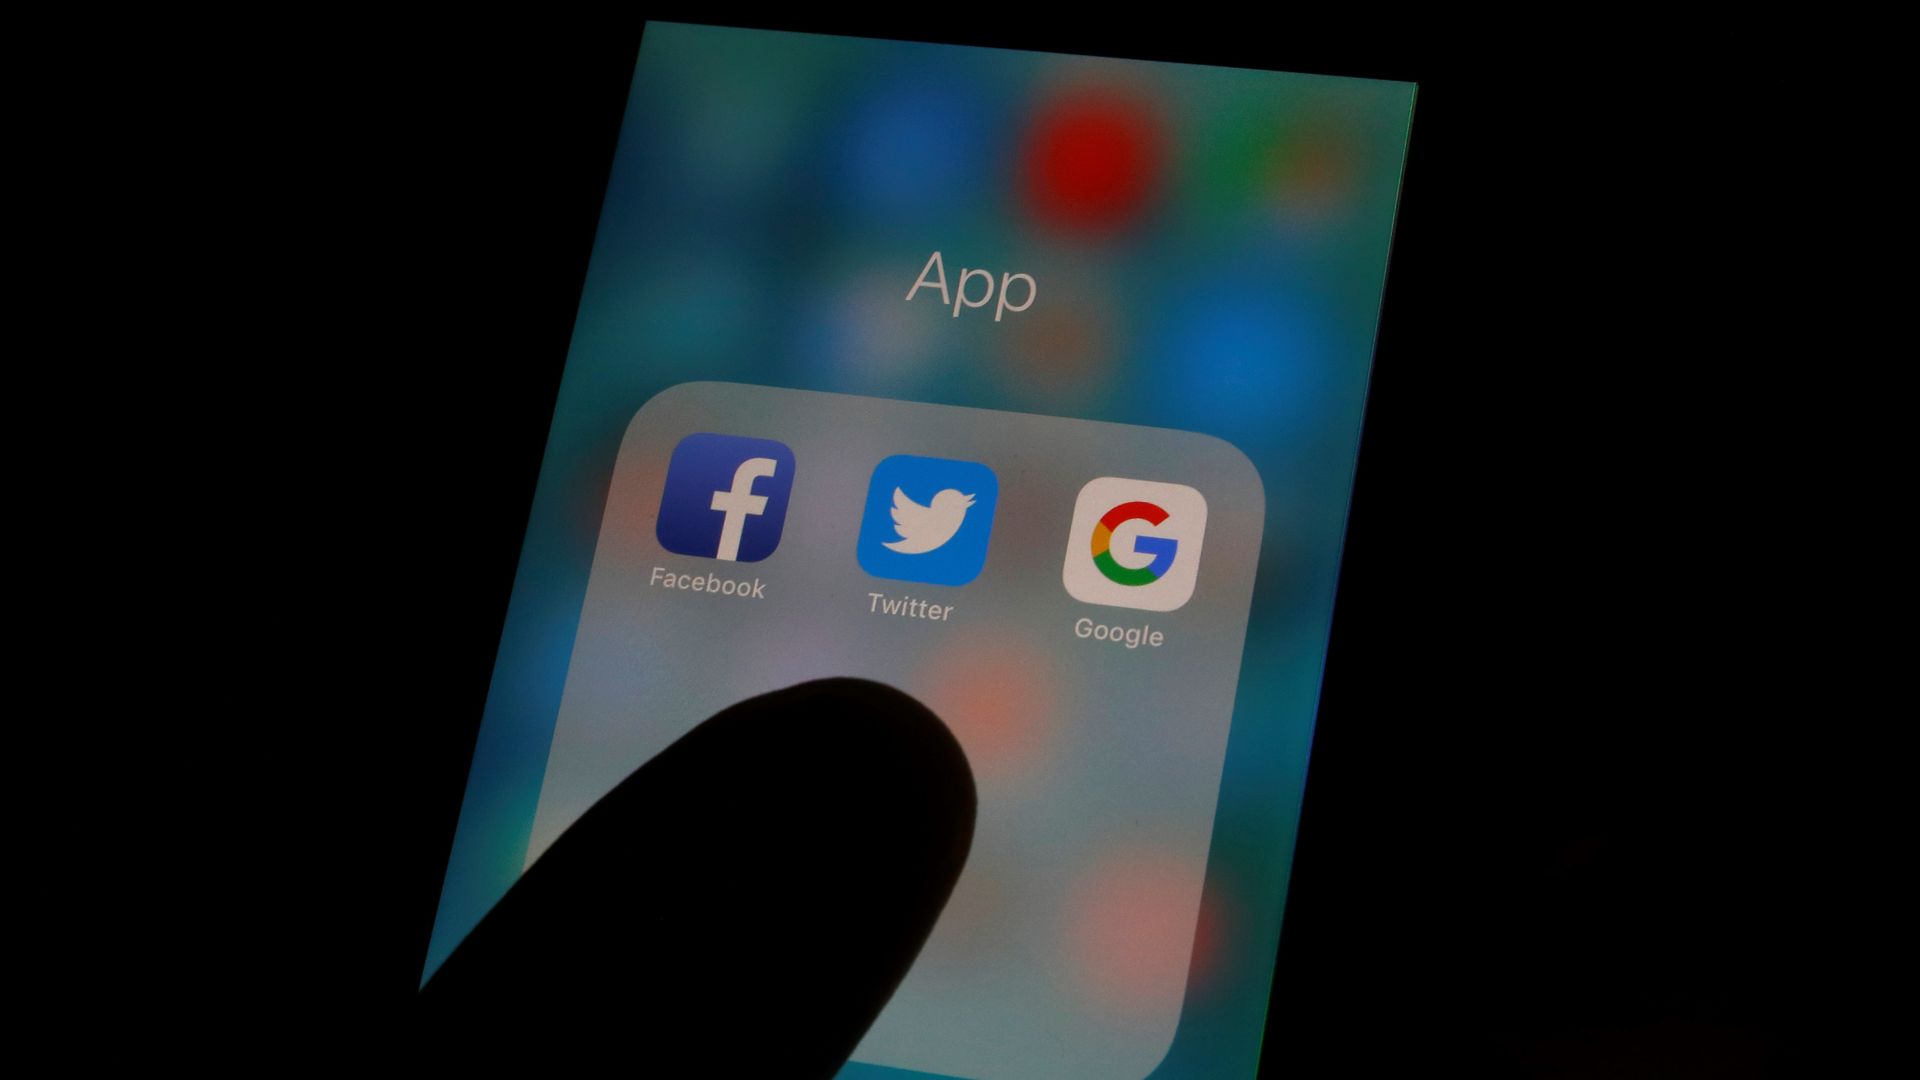 Facebook, Twitter, and Google app icons on a smartphone screen